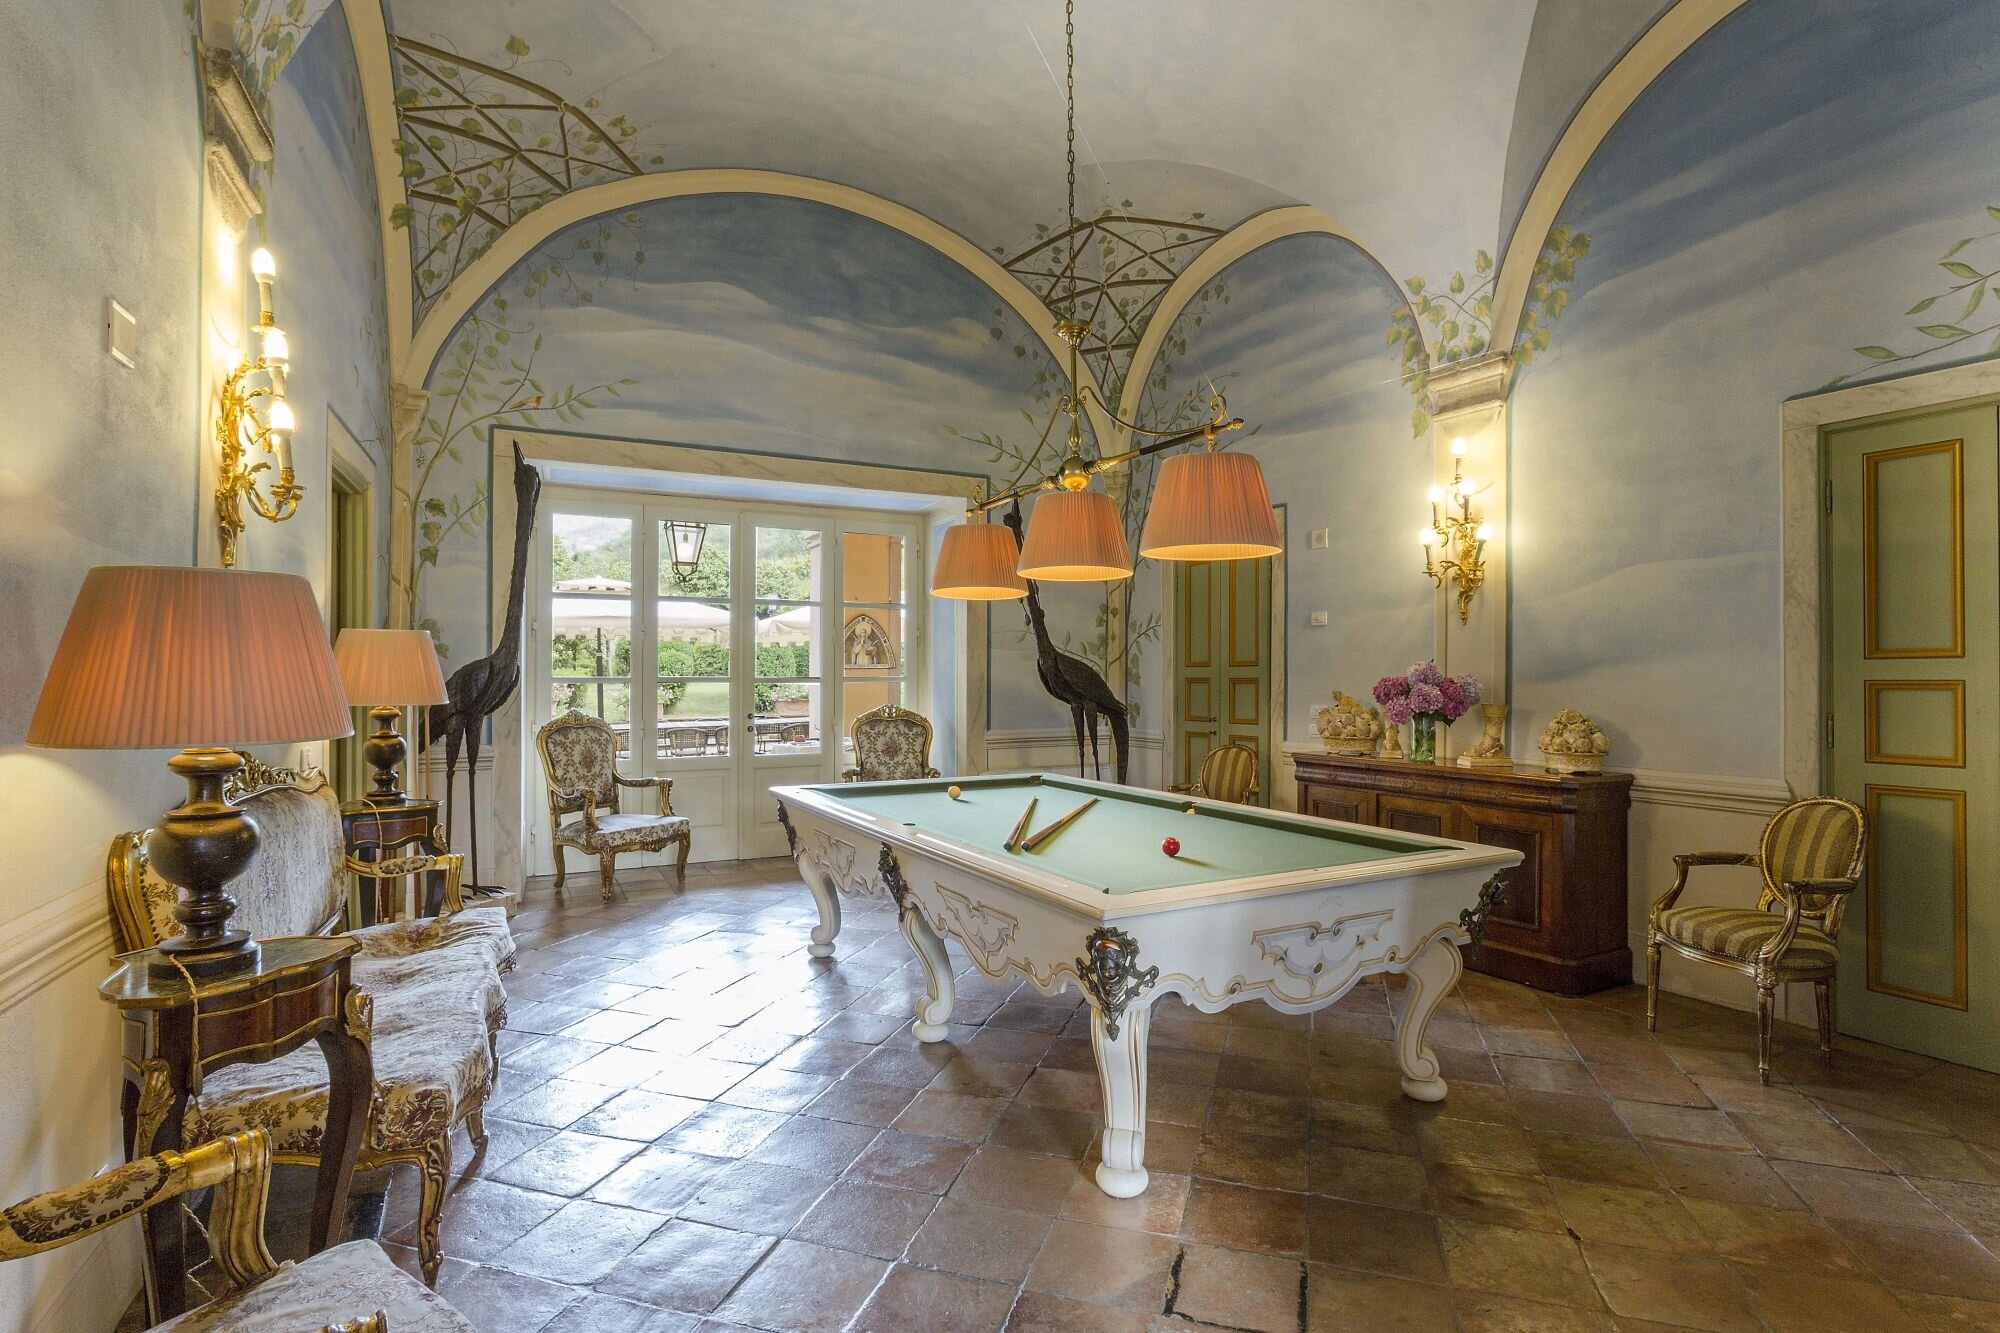 Francis York A Portfolio of Luxury Tuscan Villa Rentals is Coming to Auction18.jpeg